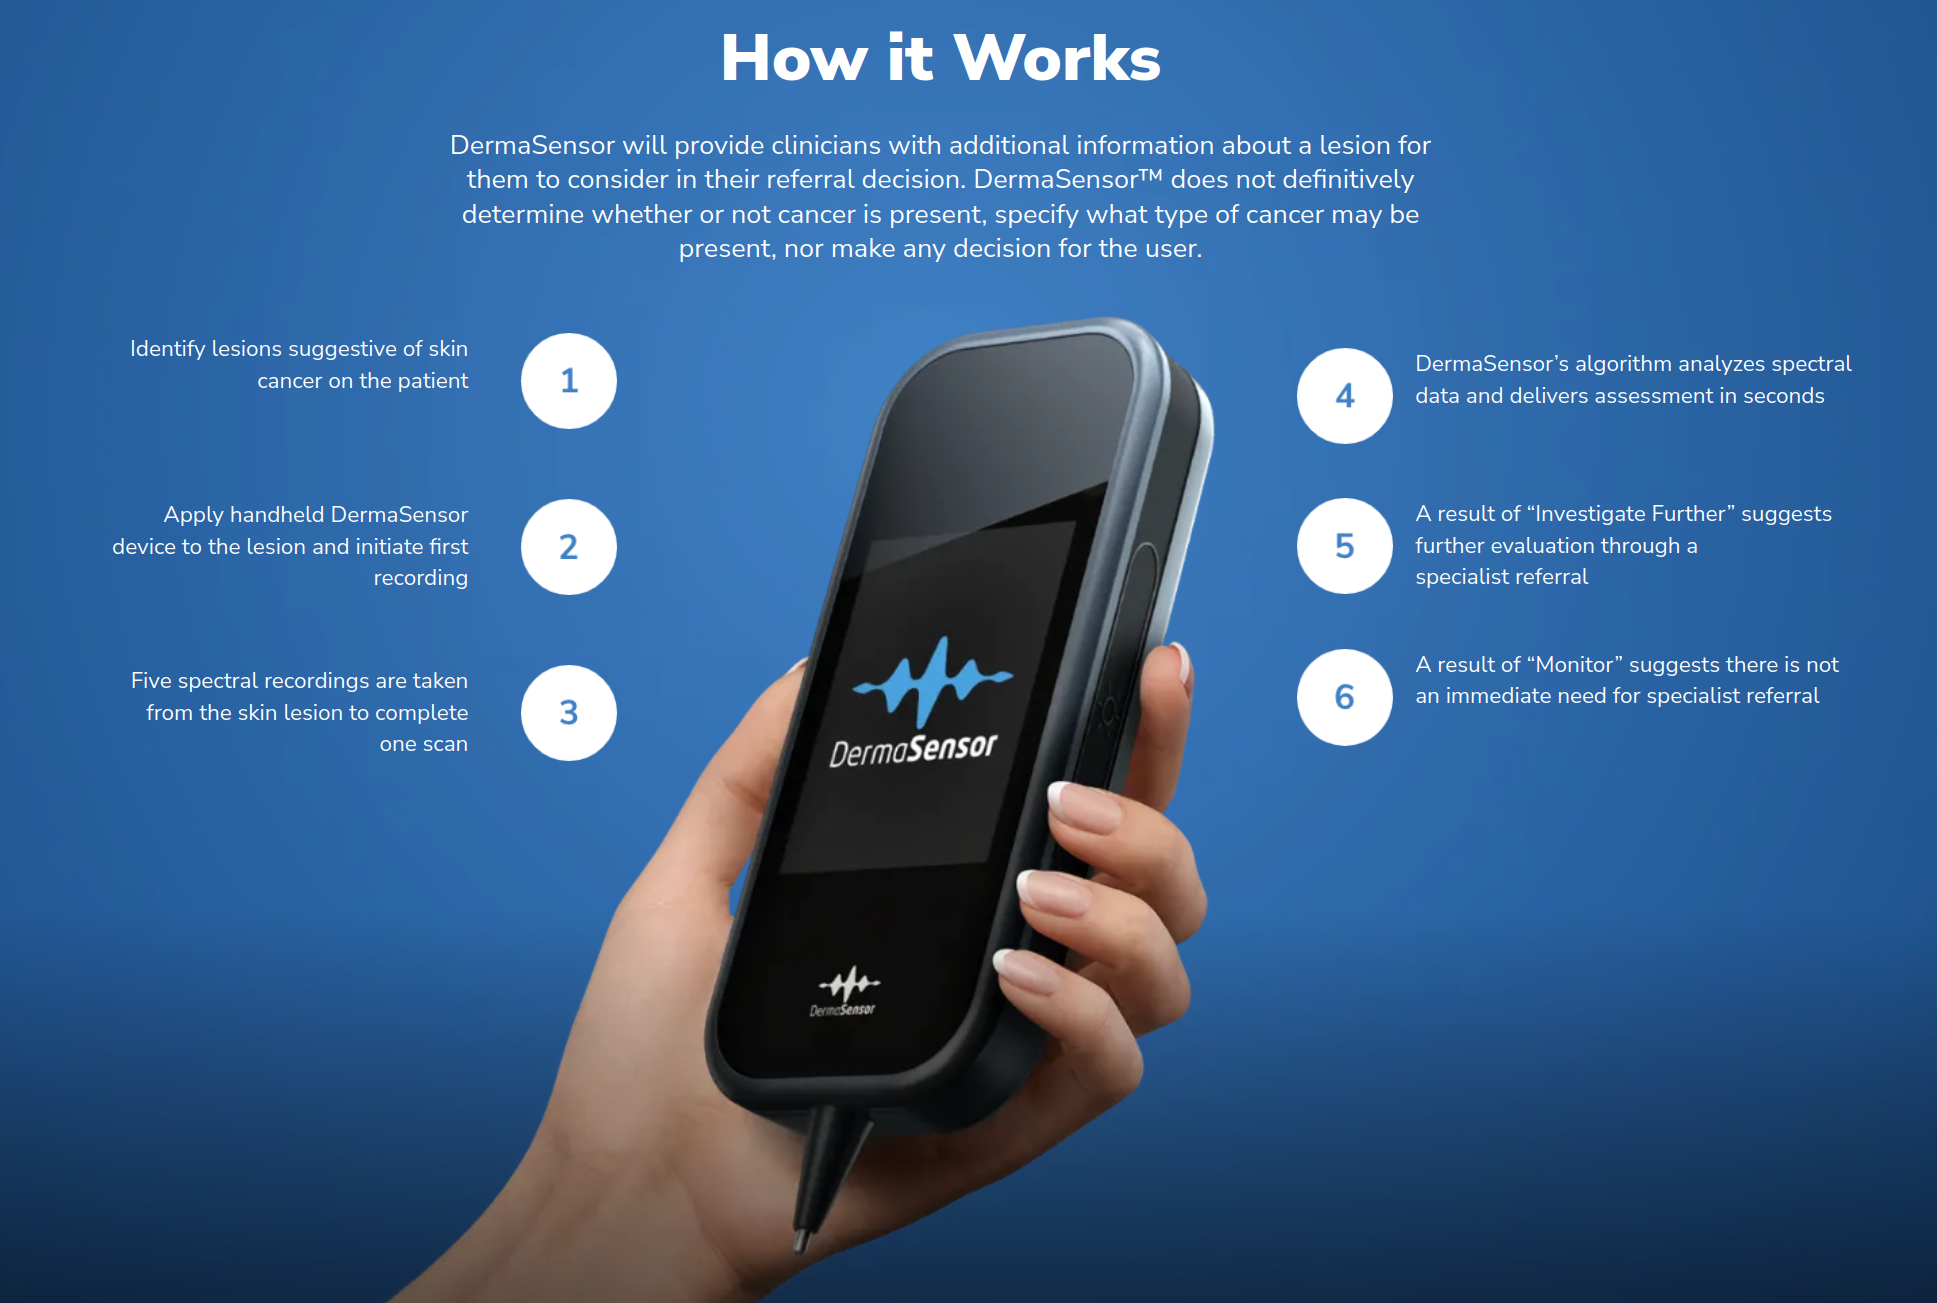 Infographic showing a hand holding the DermaSensor device and explaining how it works